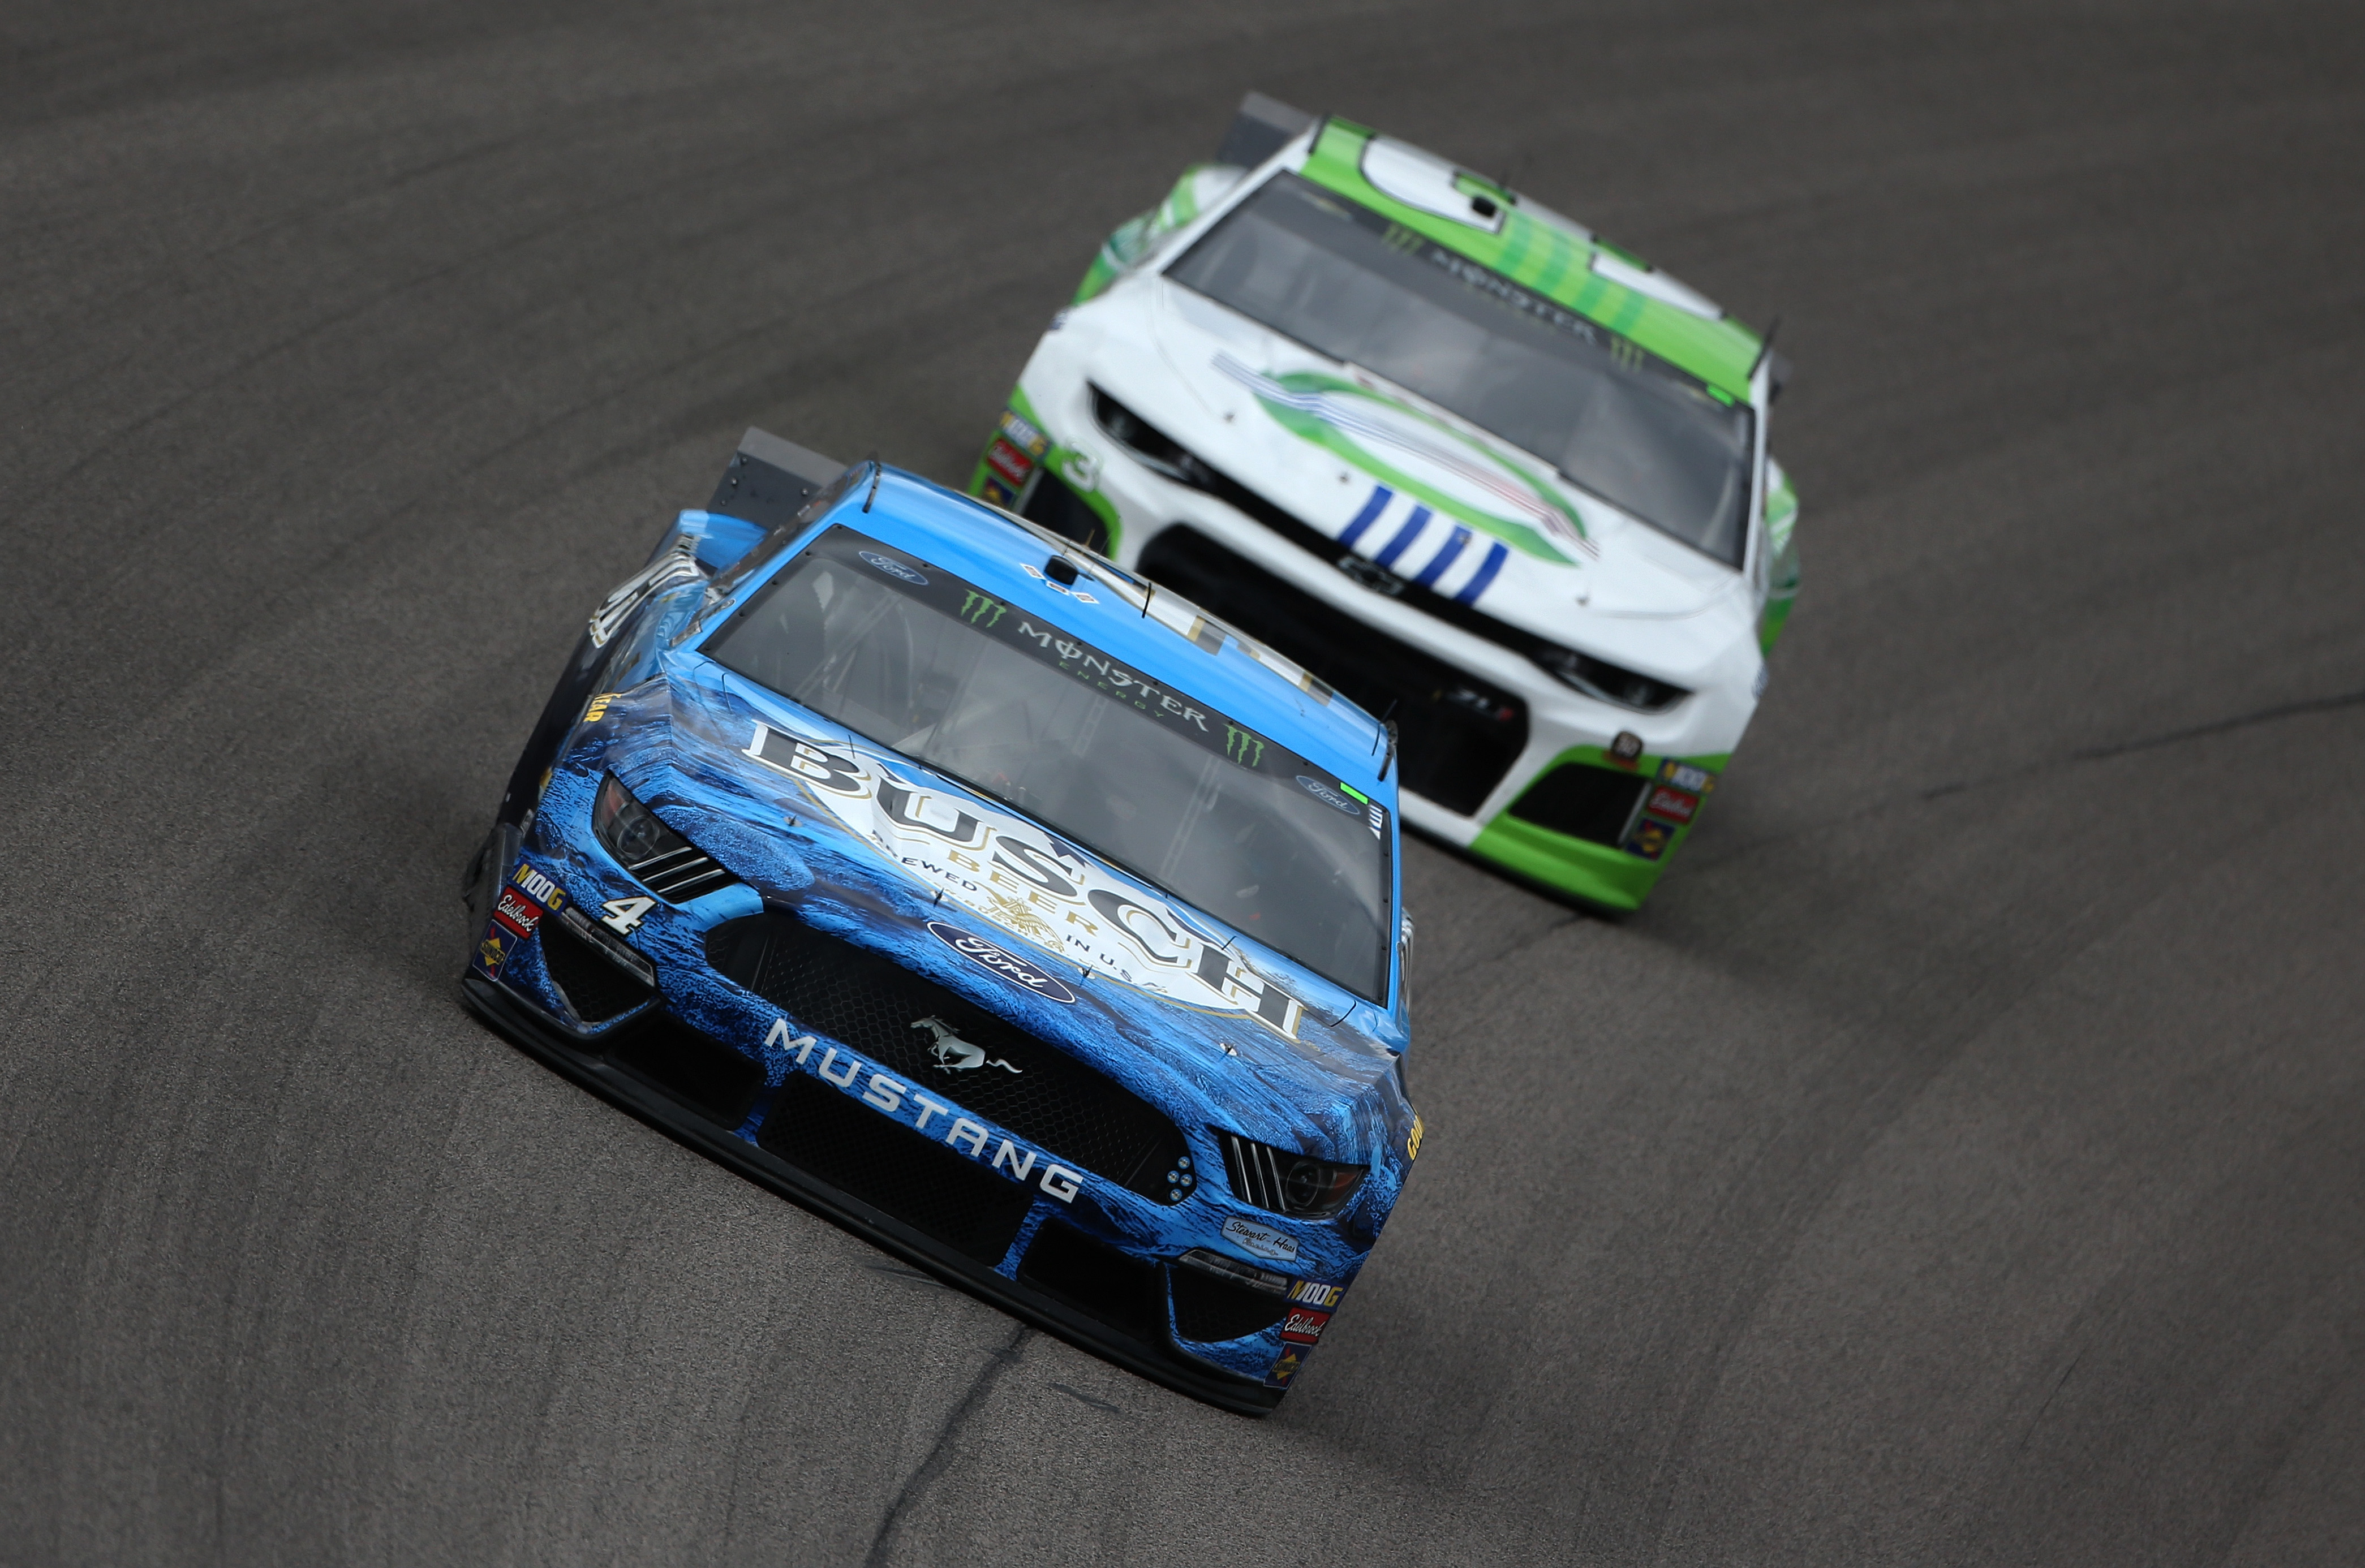 Pole sitter Kevin Harvick wants another Digital Ally 400 win at Kansas. (Photo Credit: Brian Lawdermilk/Getty Images)